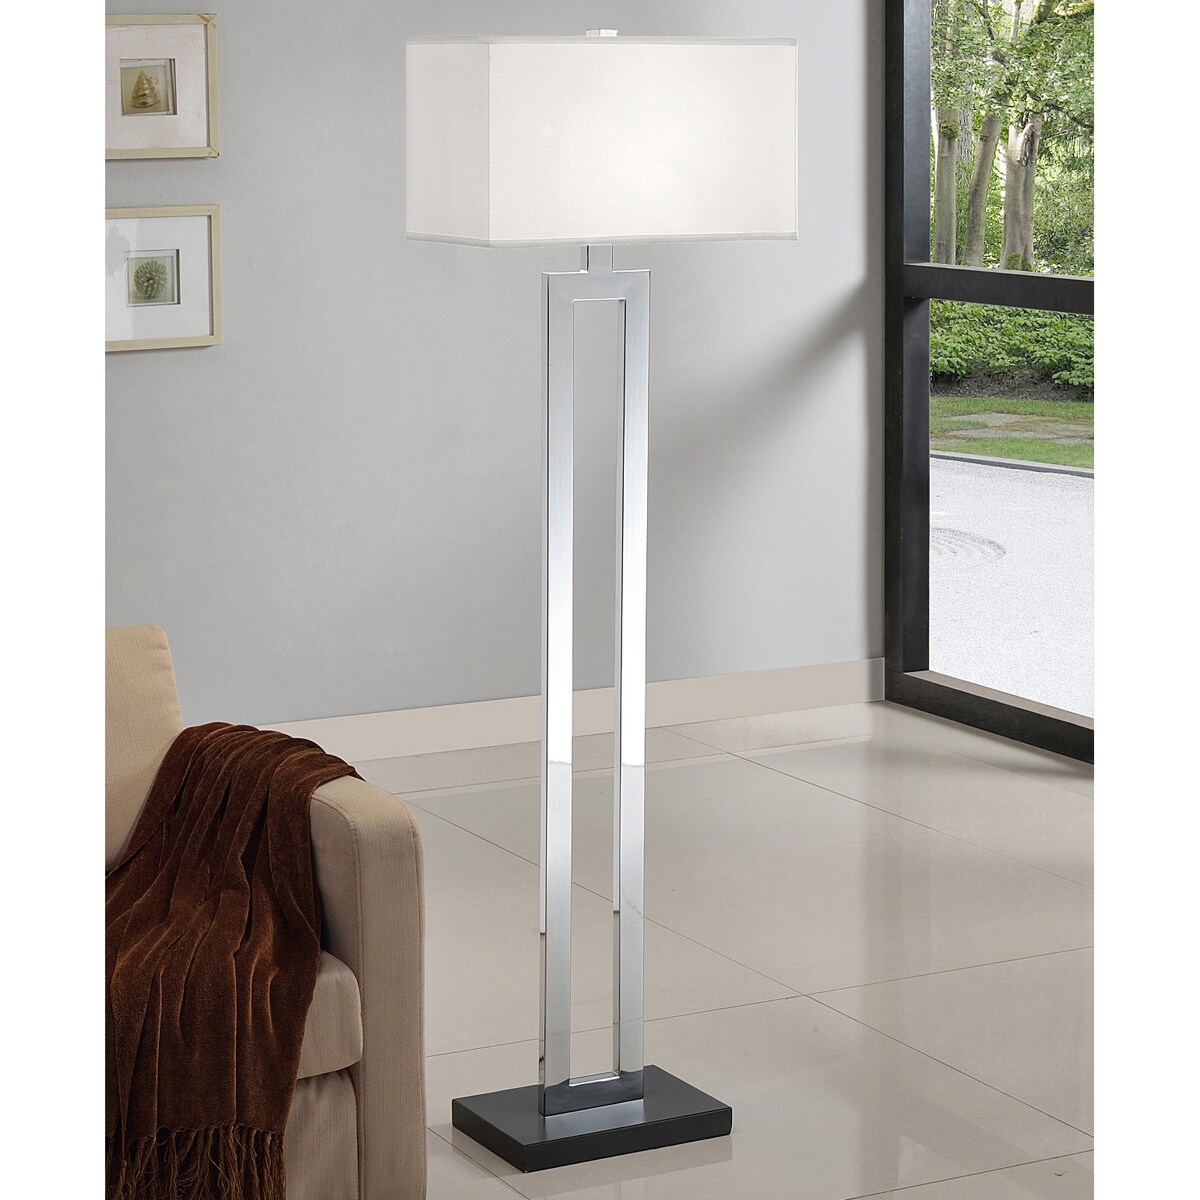 Artiva Usa Geometric Modern Chrome/black Floor Lamp (MetalSetting IndoorFixture finish Black chromeShades Off white linen shade; 11 inches high x 18.5 inches wide x 10 inches deepNumber of lights One (1)Requires One (1) 100 watts 3 way bulb/ 23 watts 